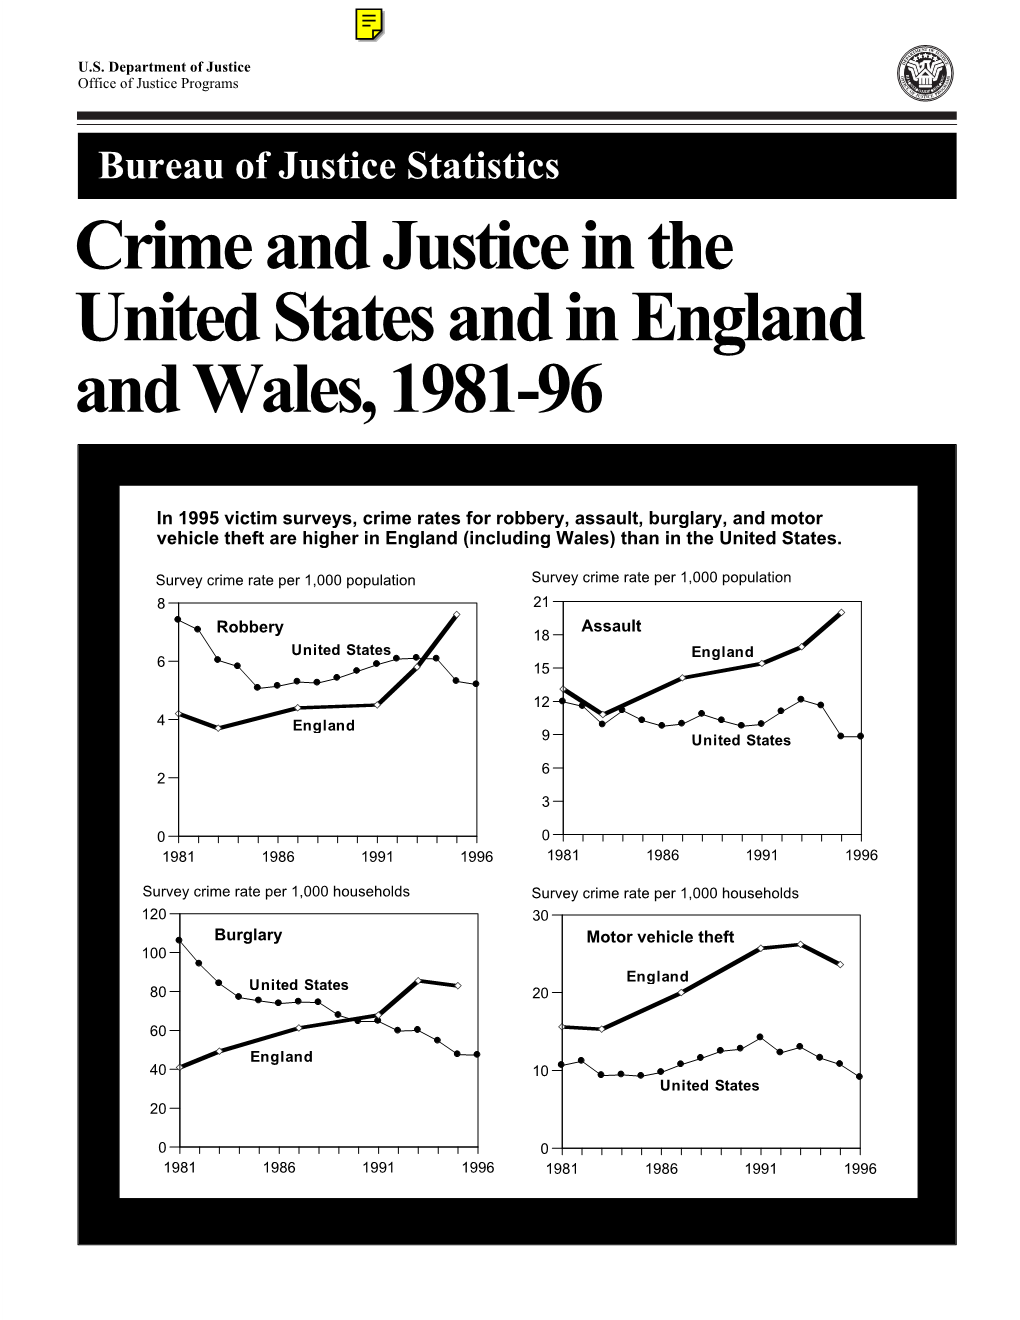 Crime and Justice in the United States and in England and Wales, 1981-96